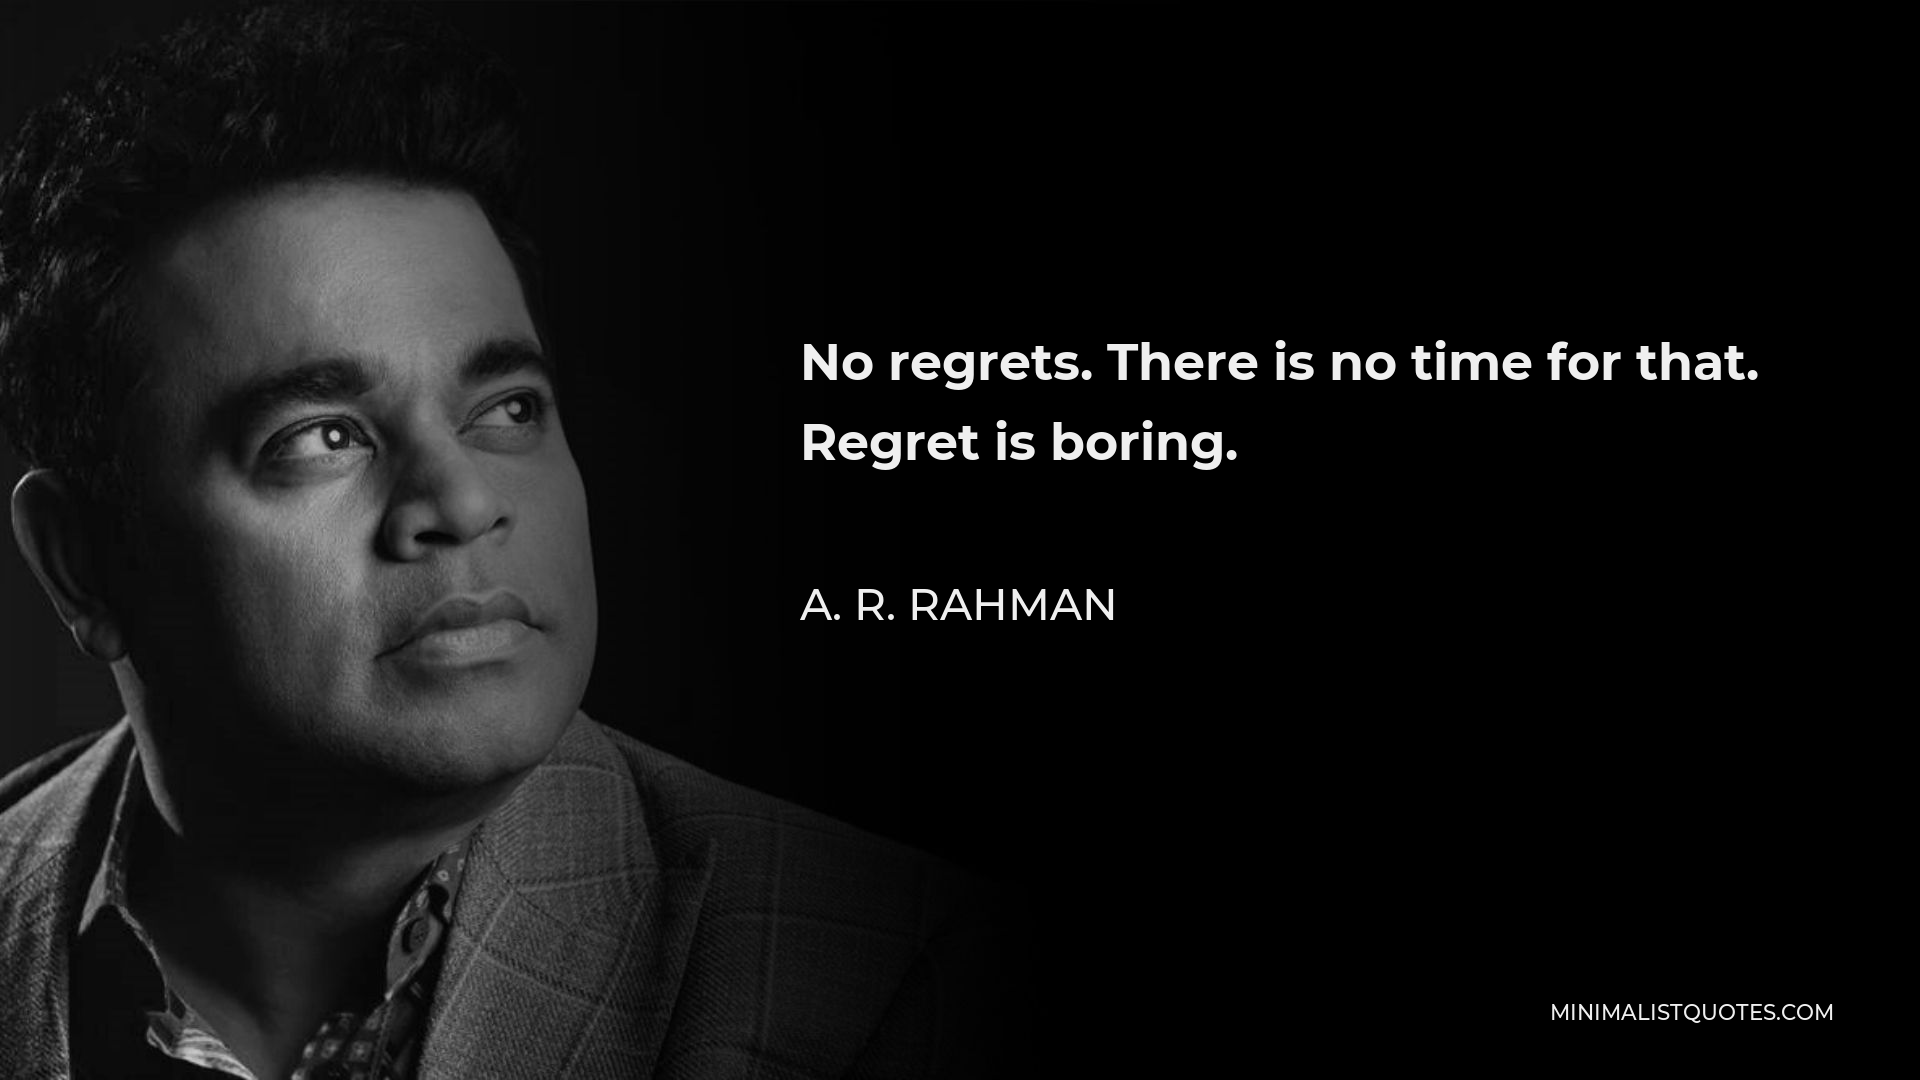 A. R. Rahman Quote - No regrets. There is no time for that. Regret is boring.